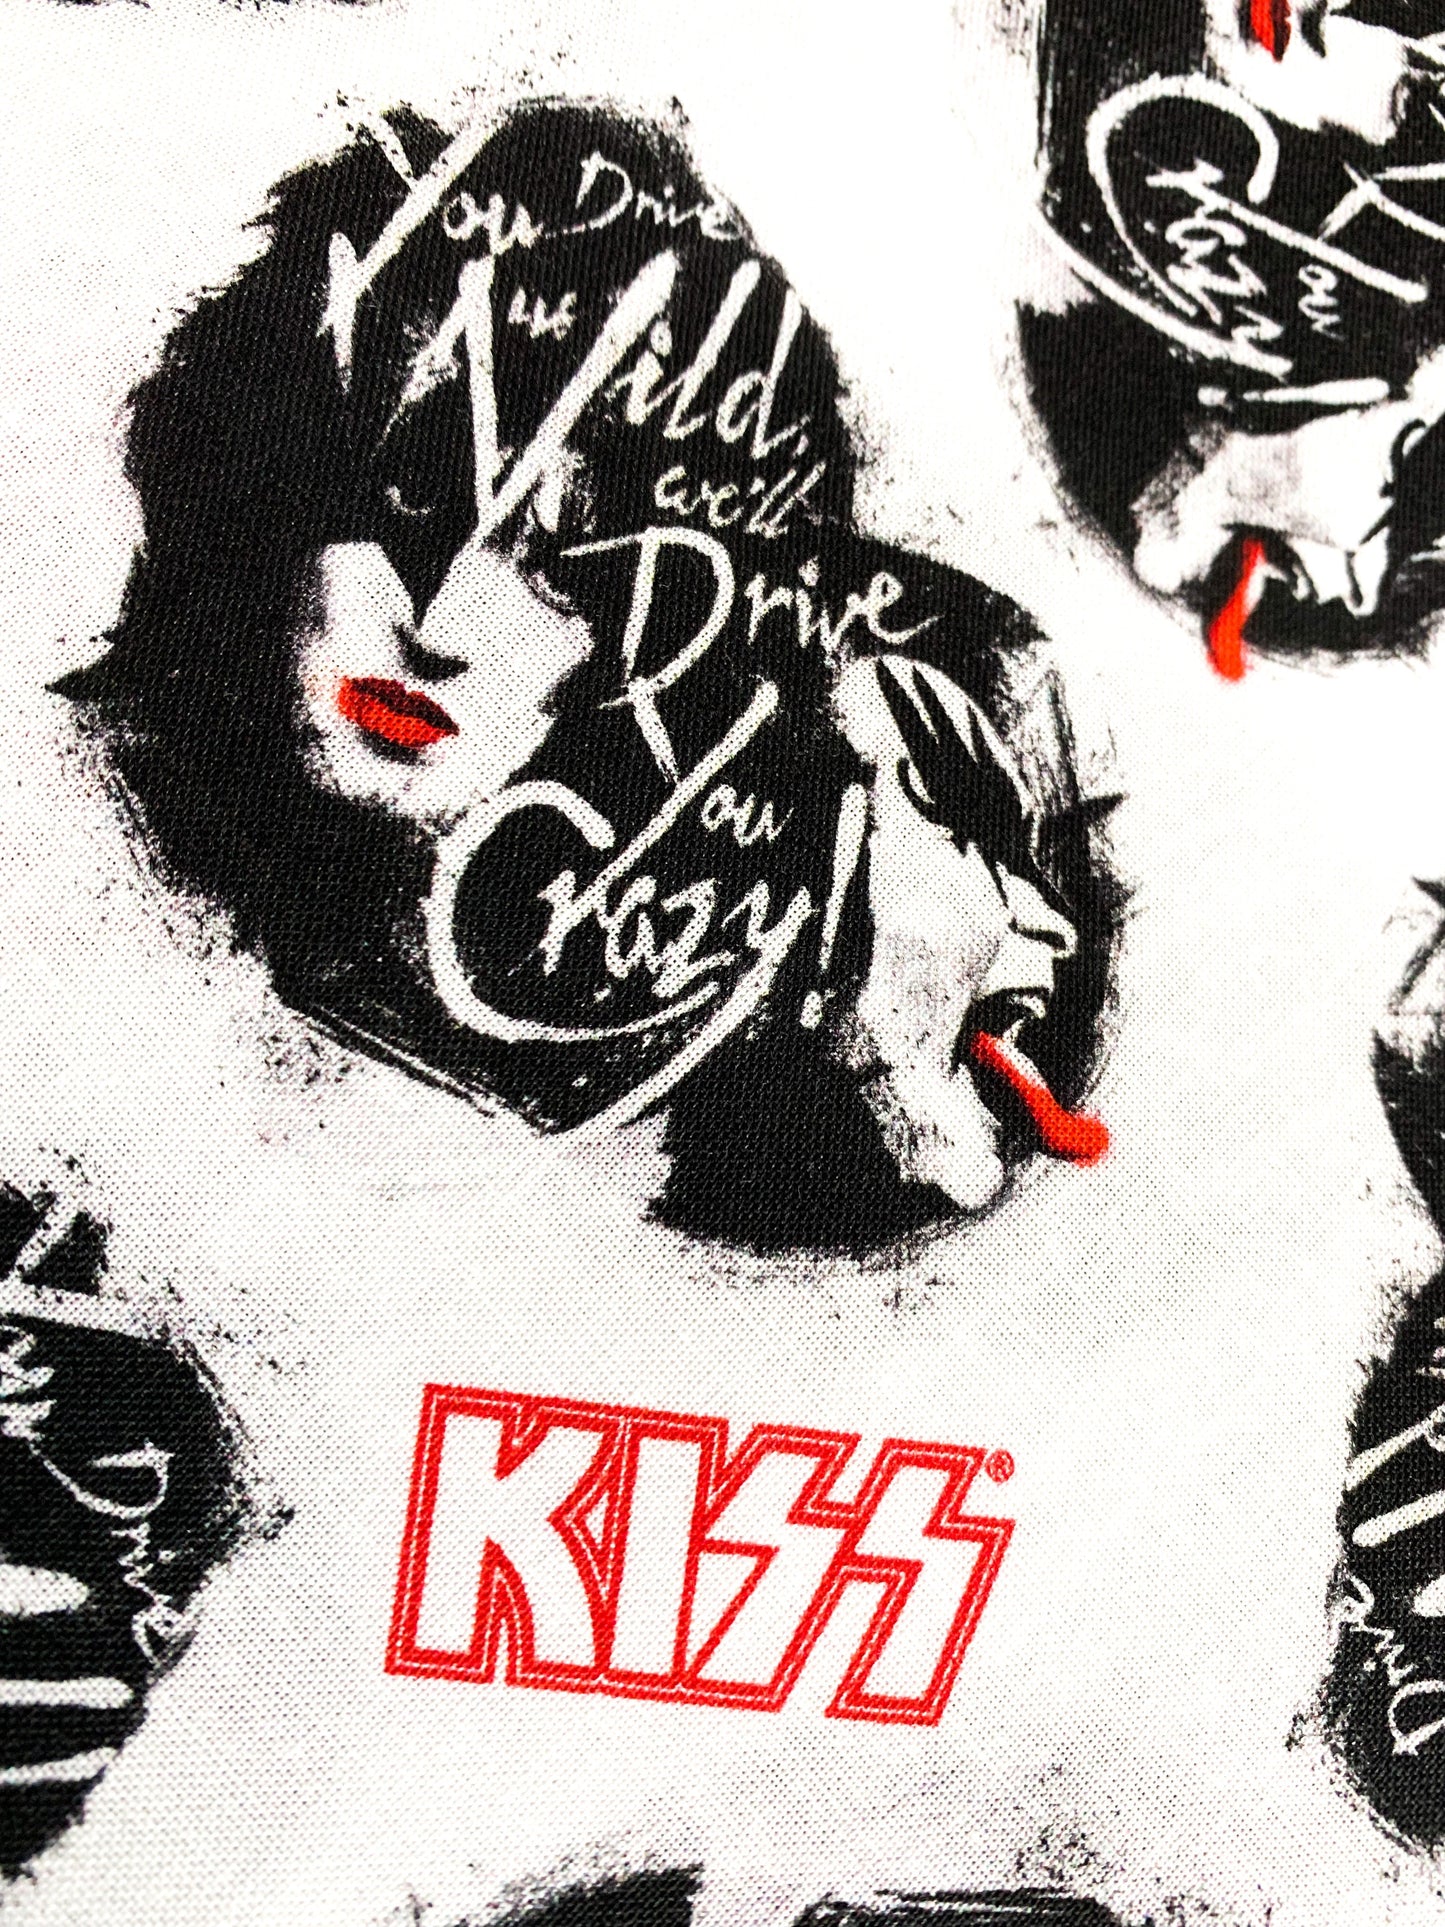 White Kiss band fabric 71057 Drive you Crazy